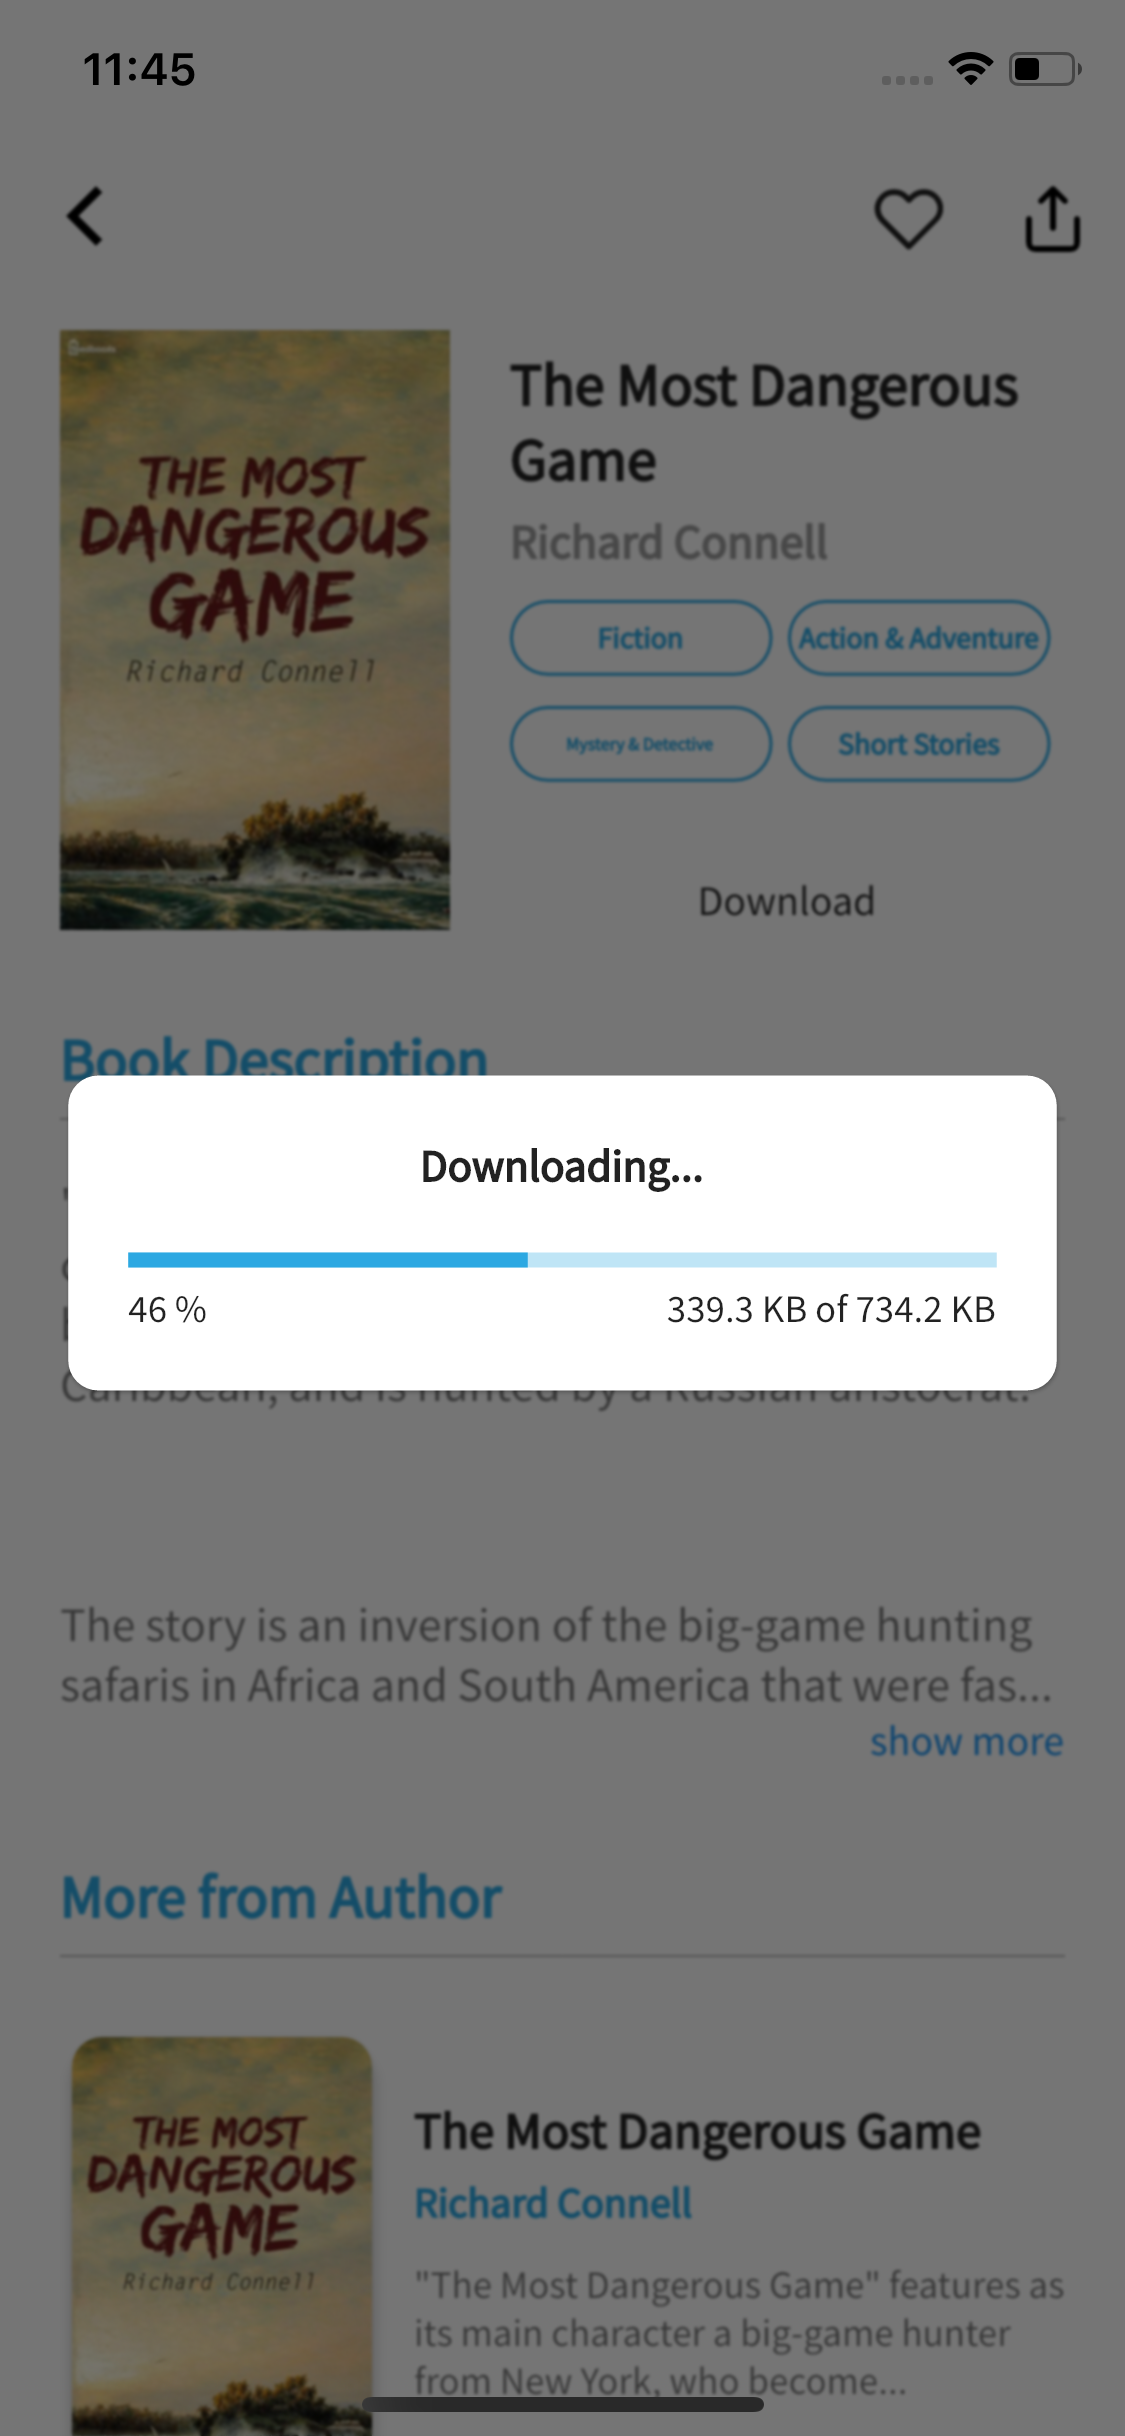 A simple Flutter app to Read and Download books